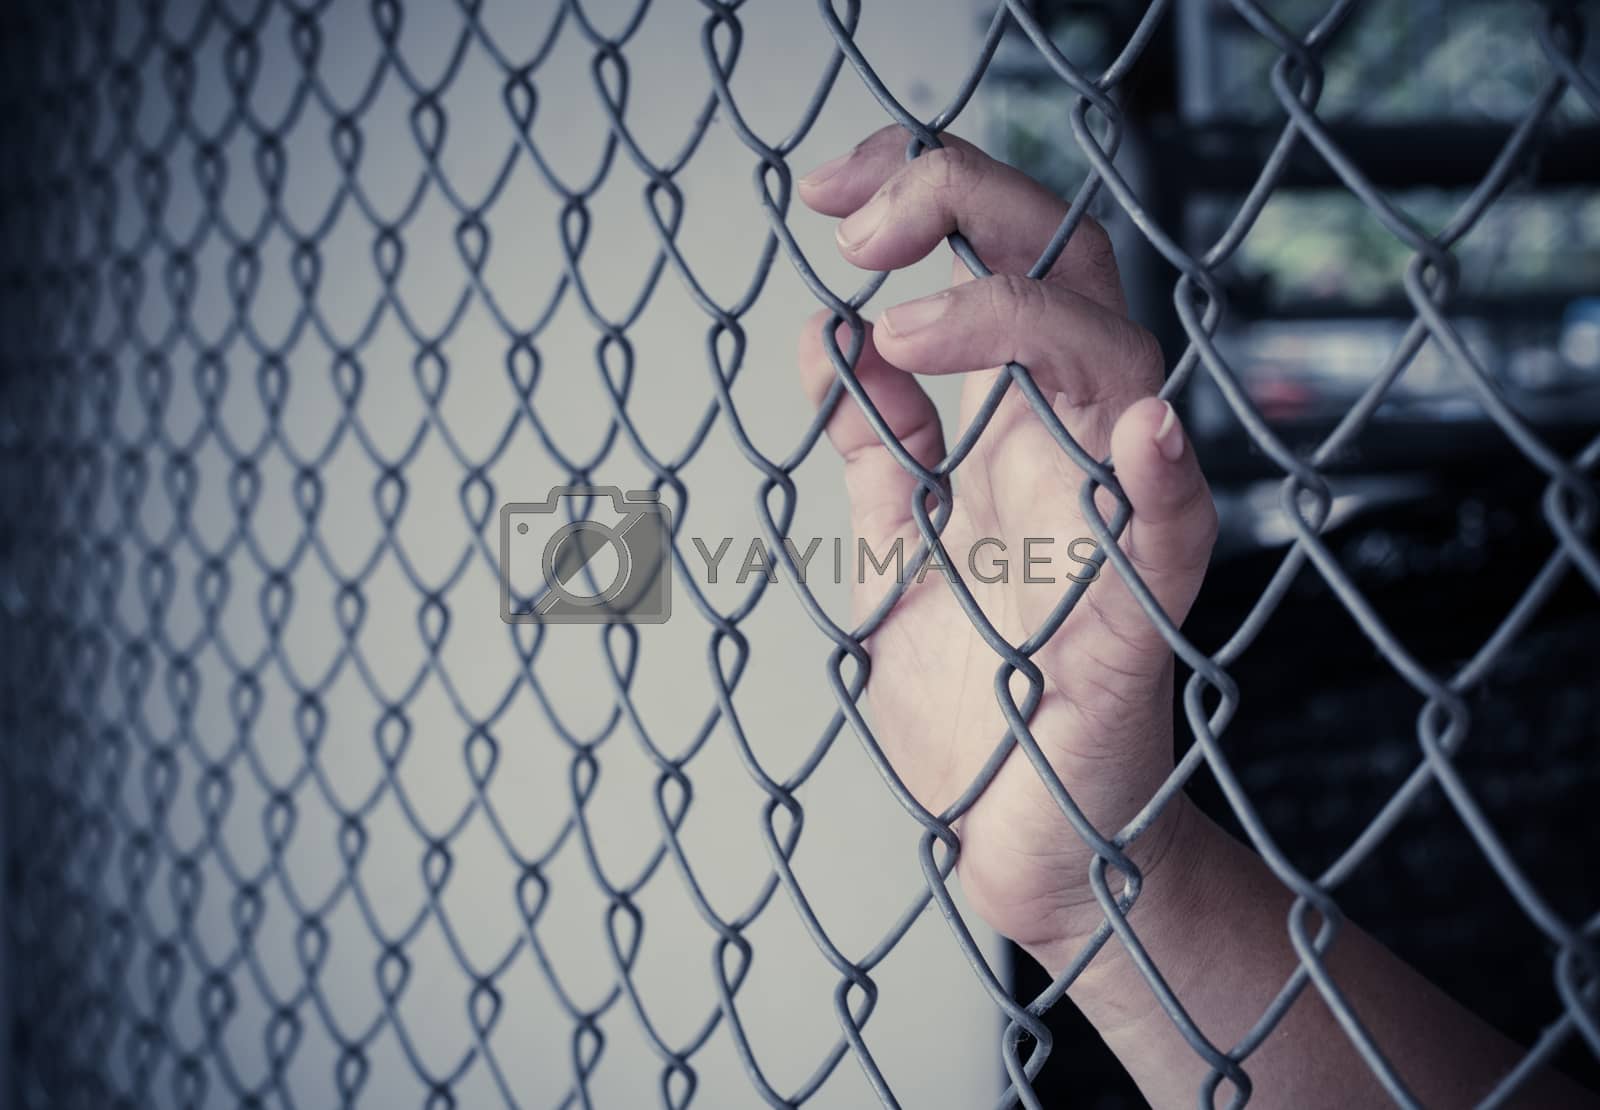 Royalty free image of Hands and Steel Cage by photobyphotoboy